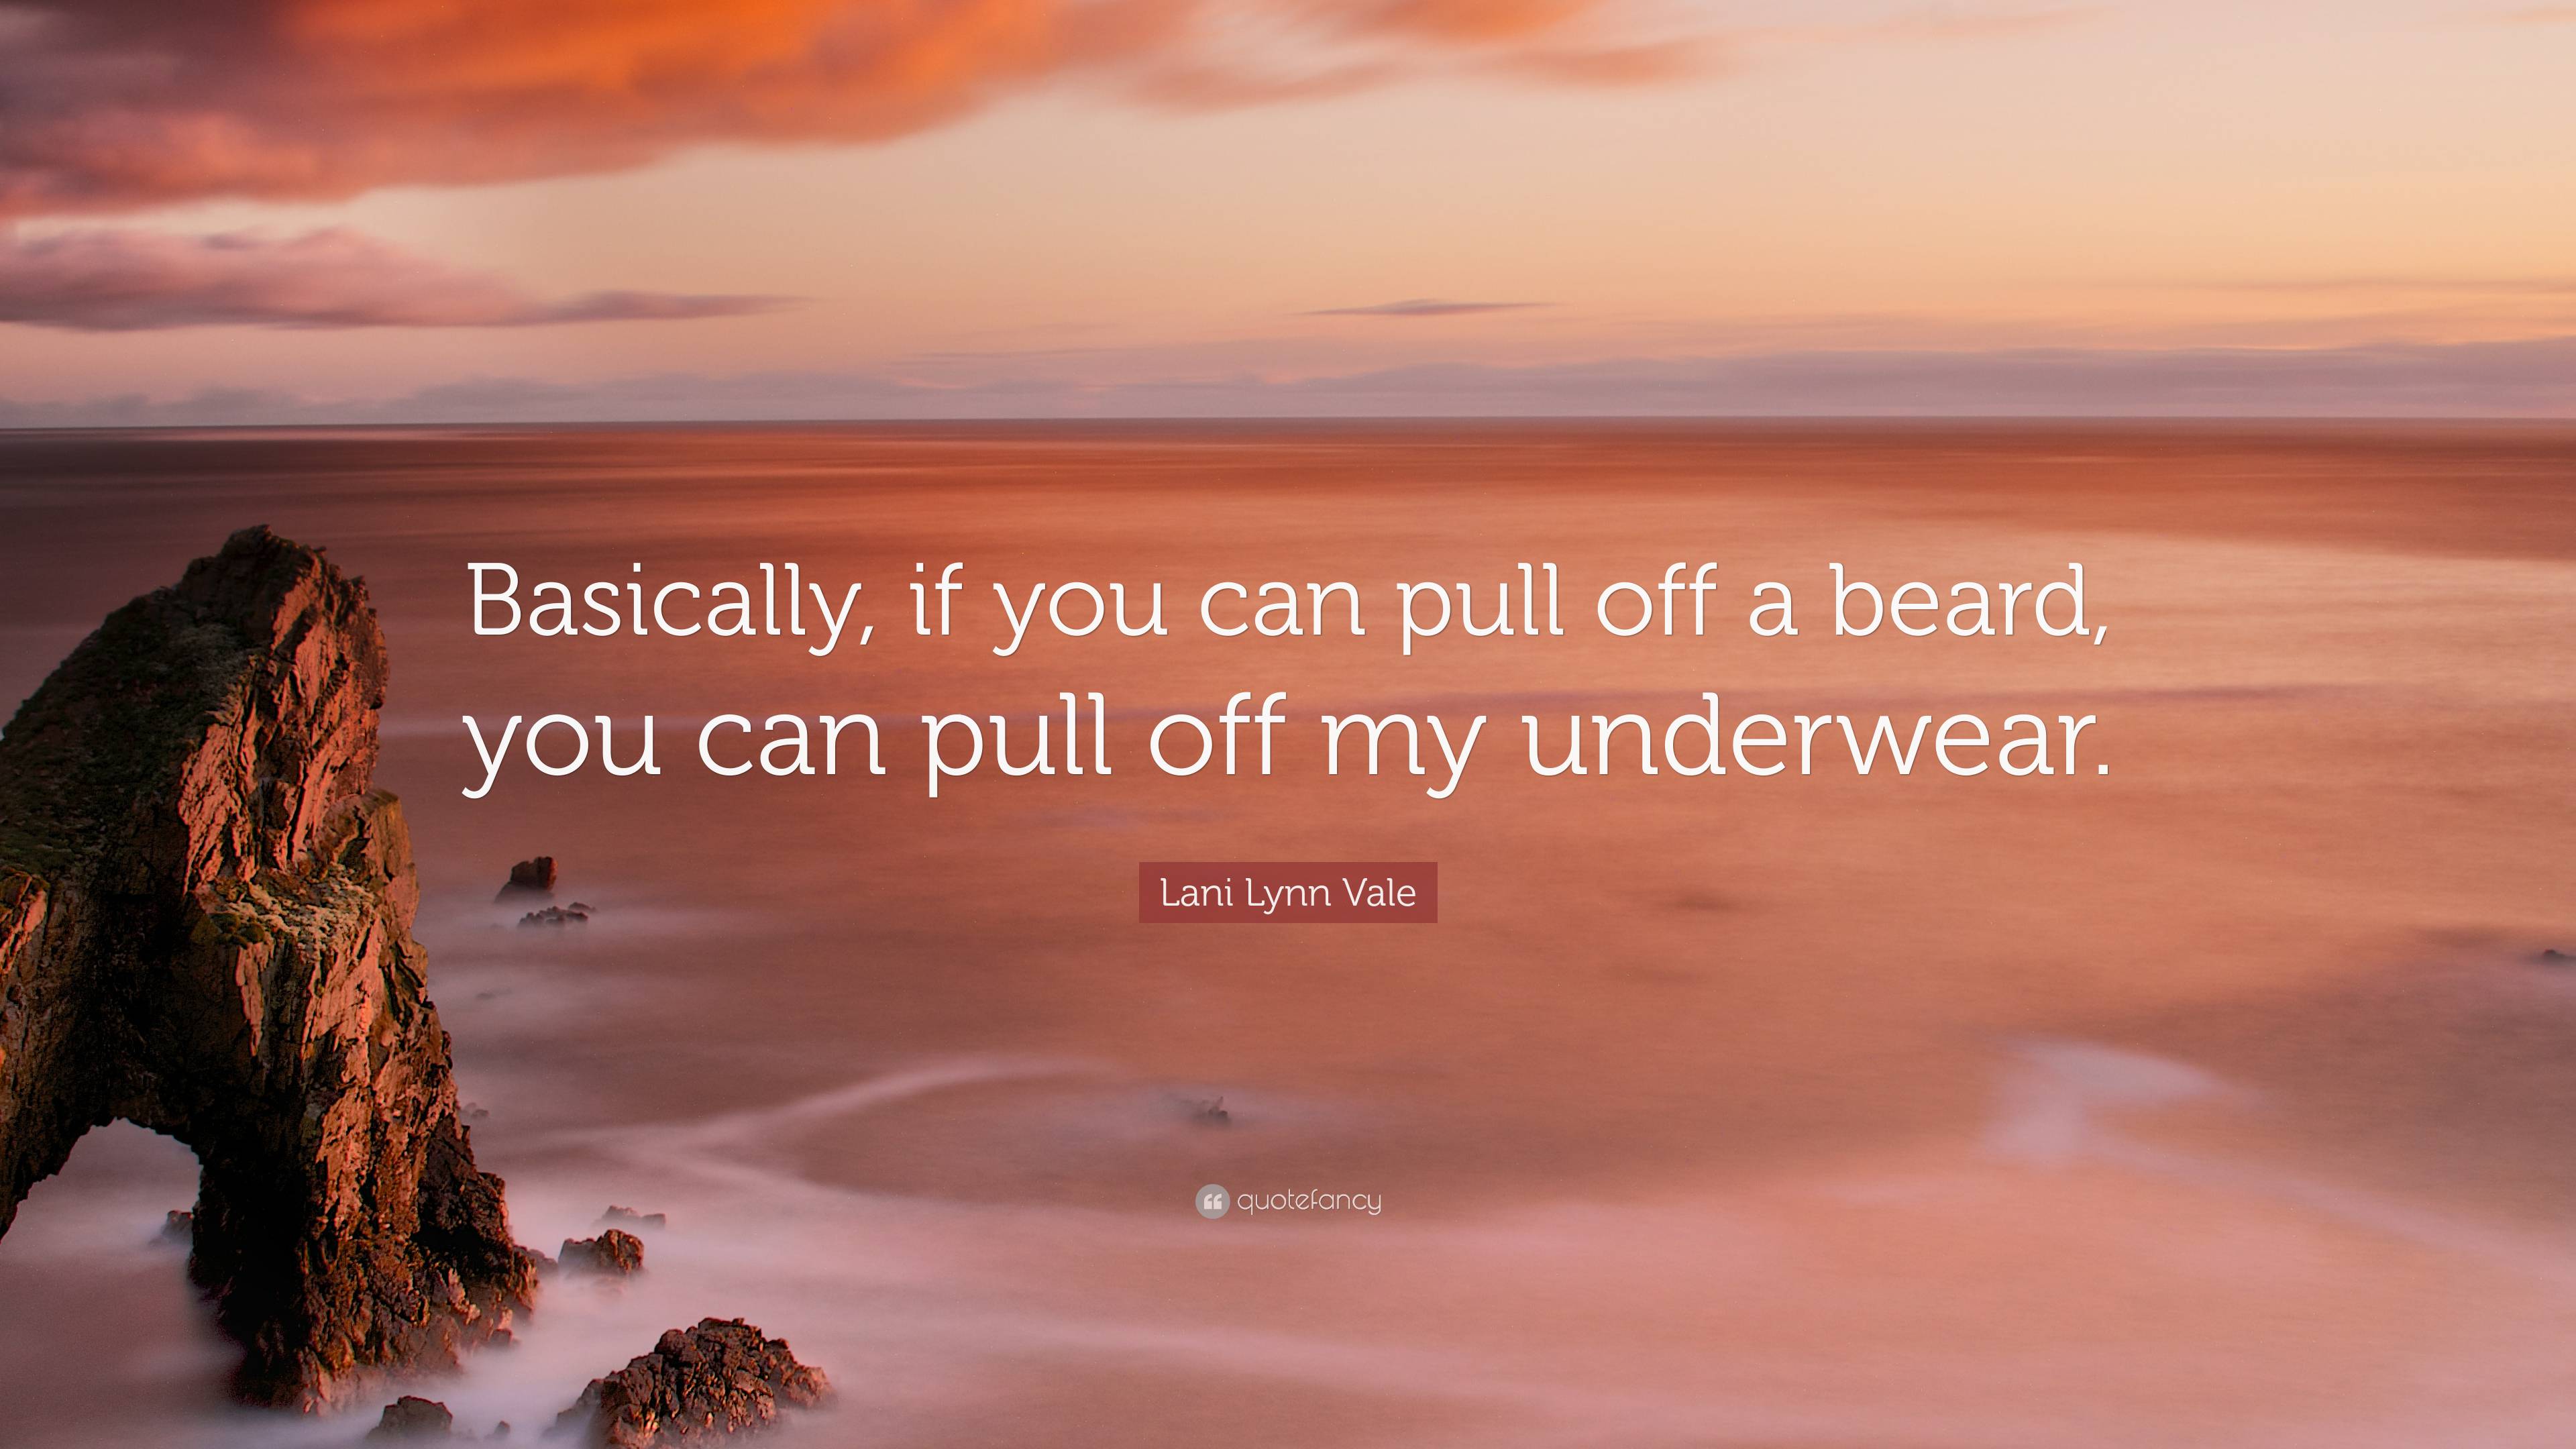 Lani Lynn Vale Quote: “Basically, if you can pull off a beard, you